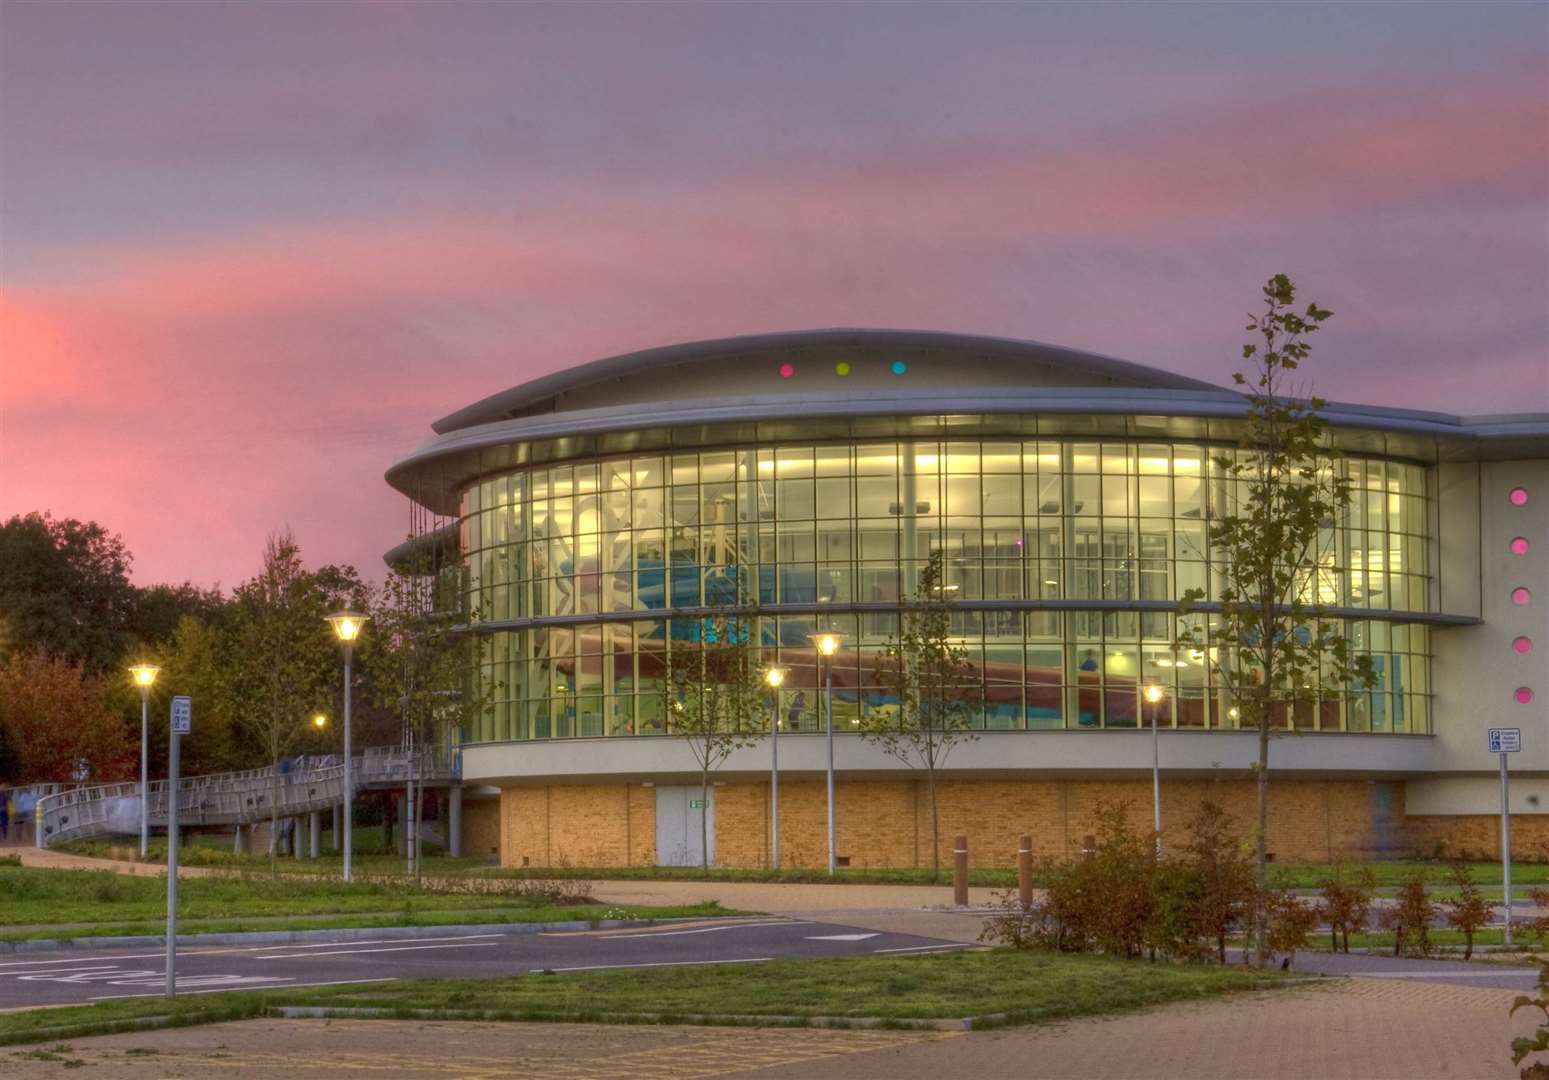 The Stour Centre in Ashford